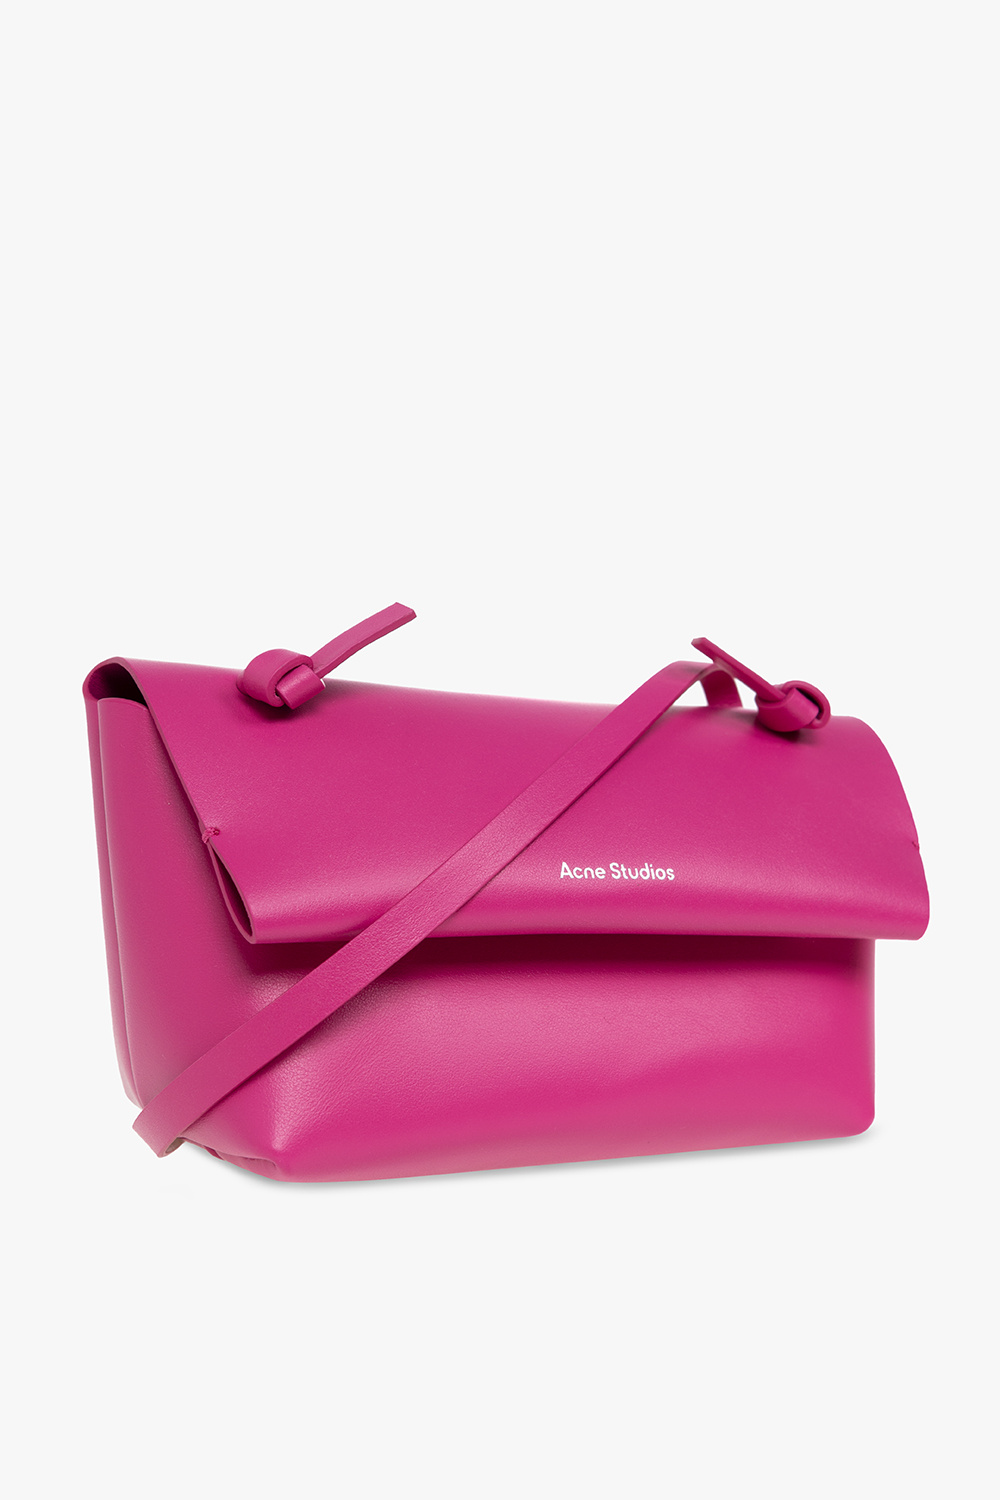 Acne Studios You need a certain bag to feel complete